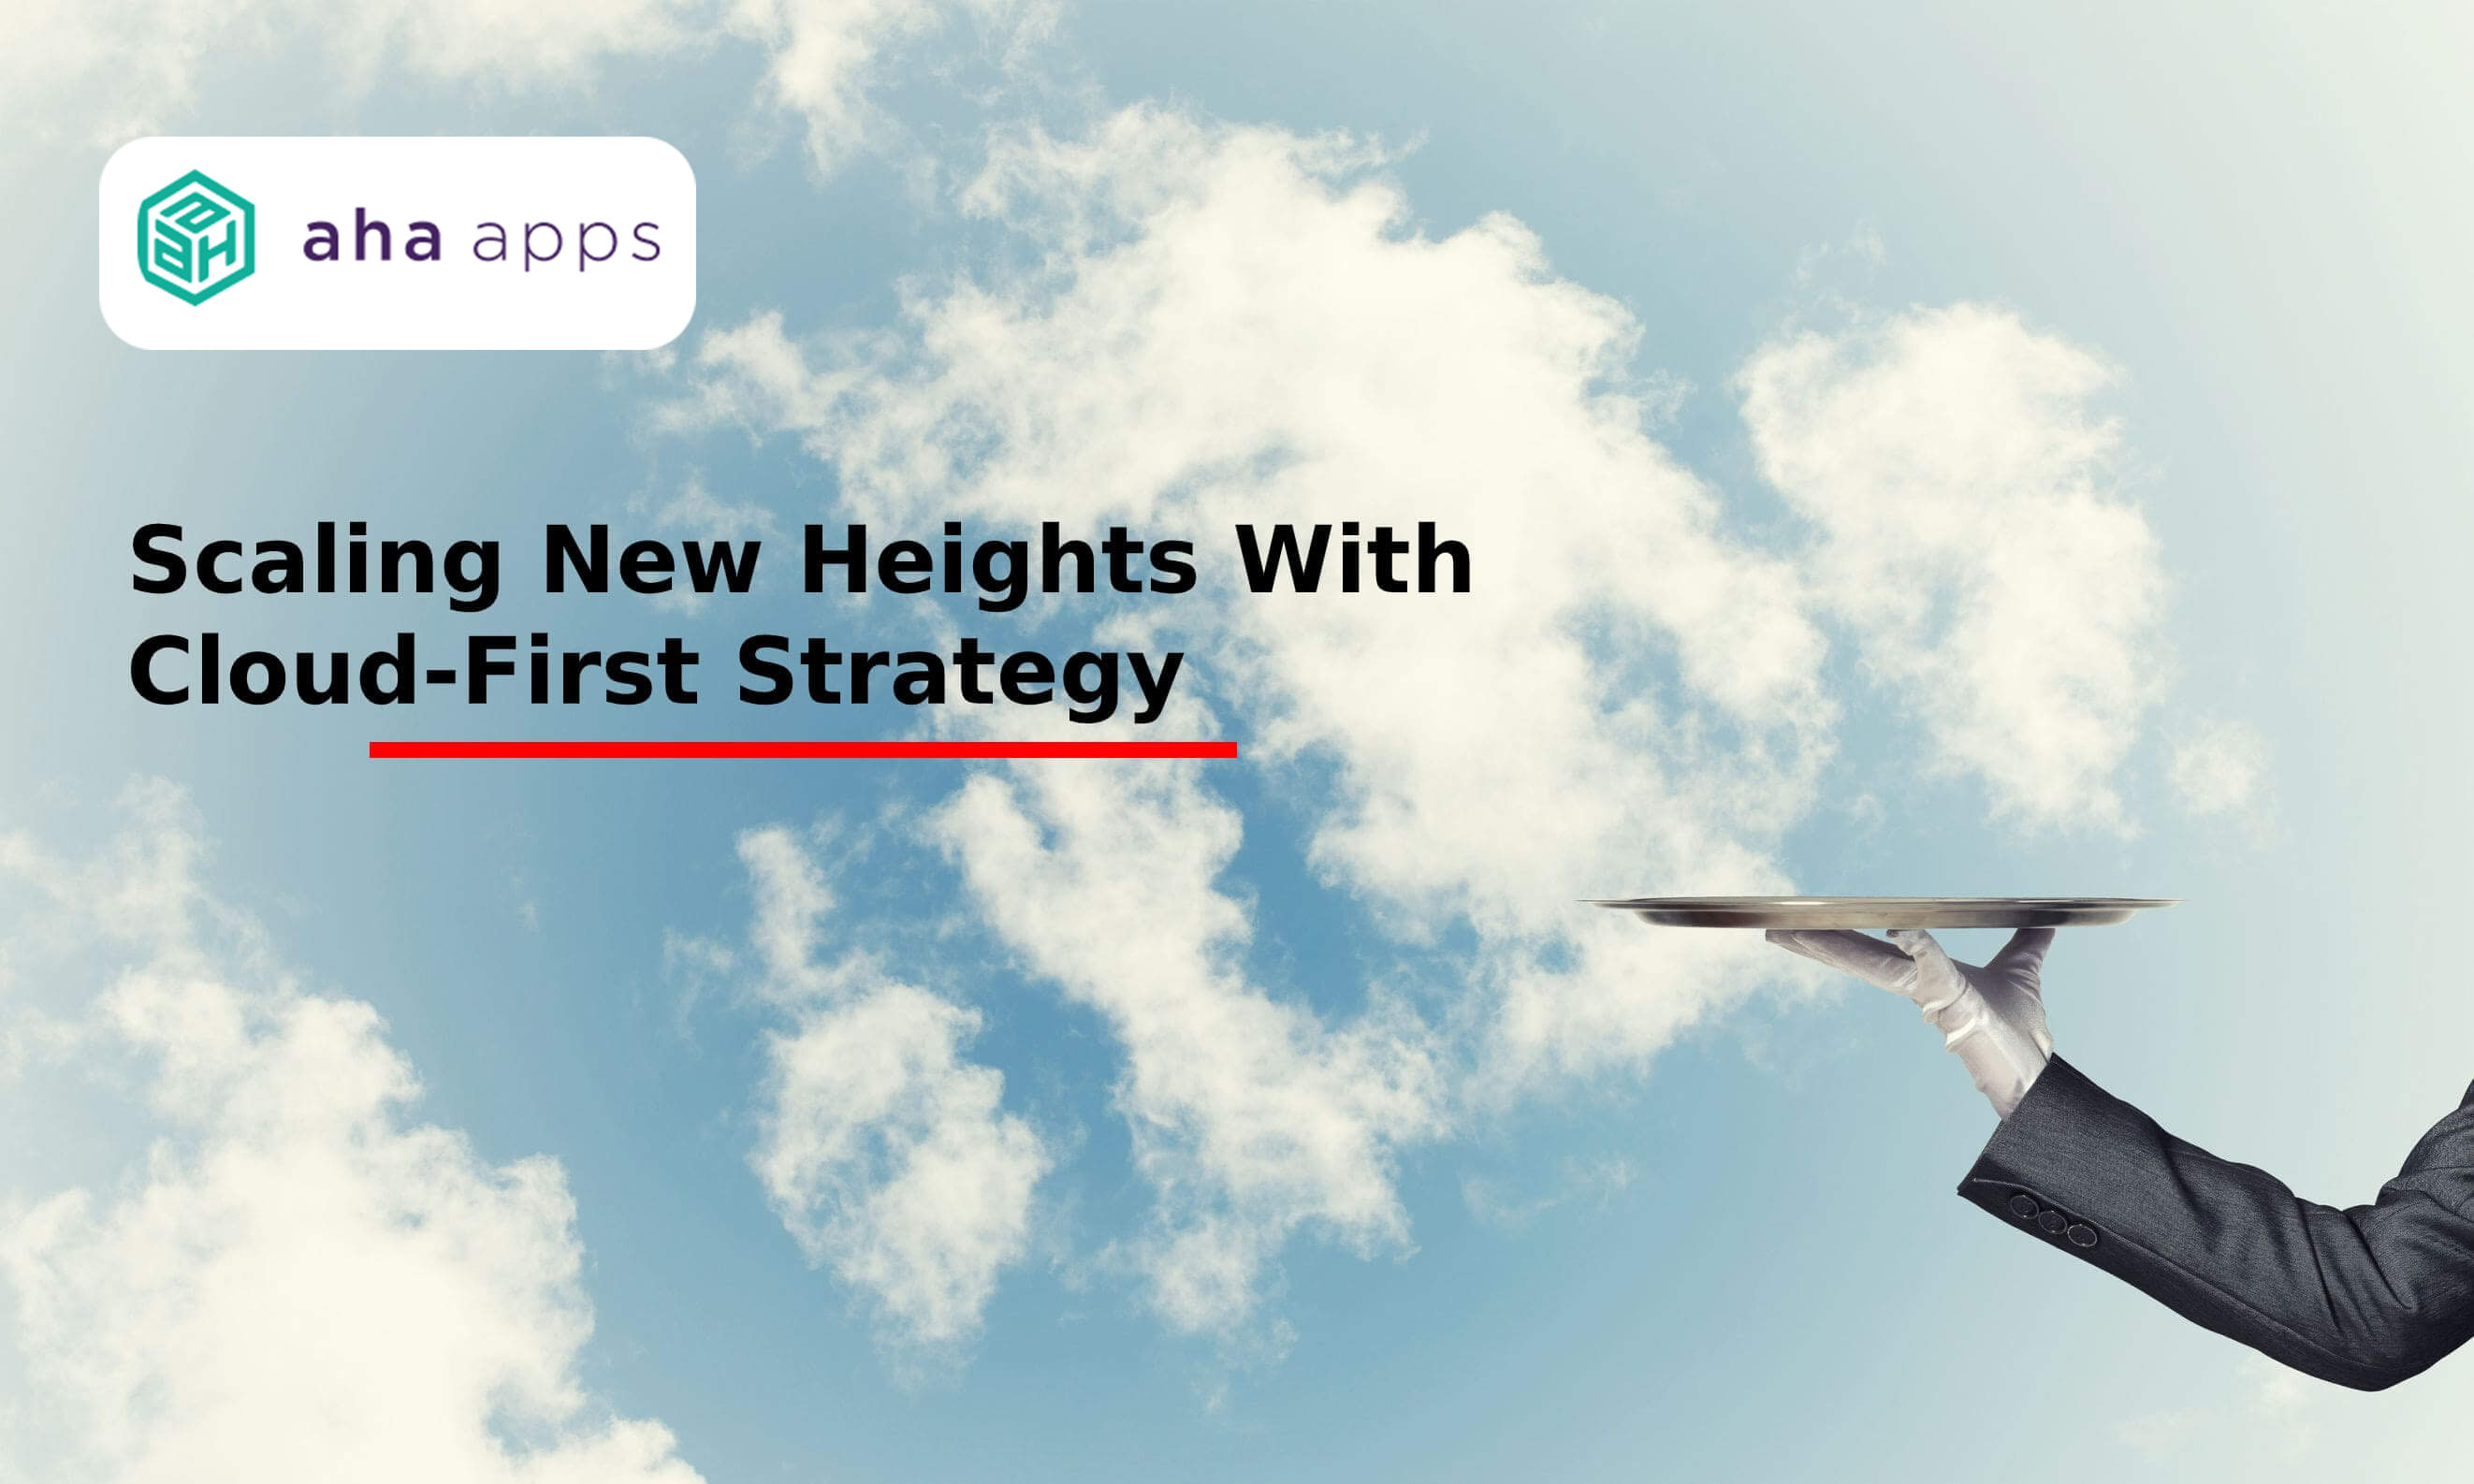 cloud-first strategy - AhaApps